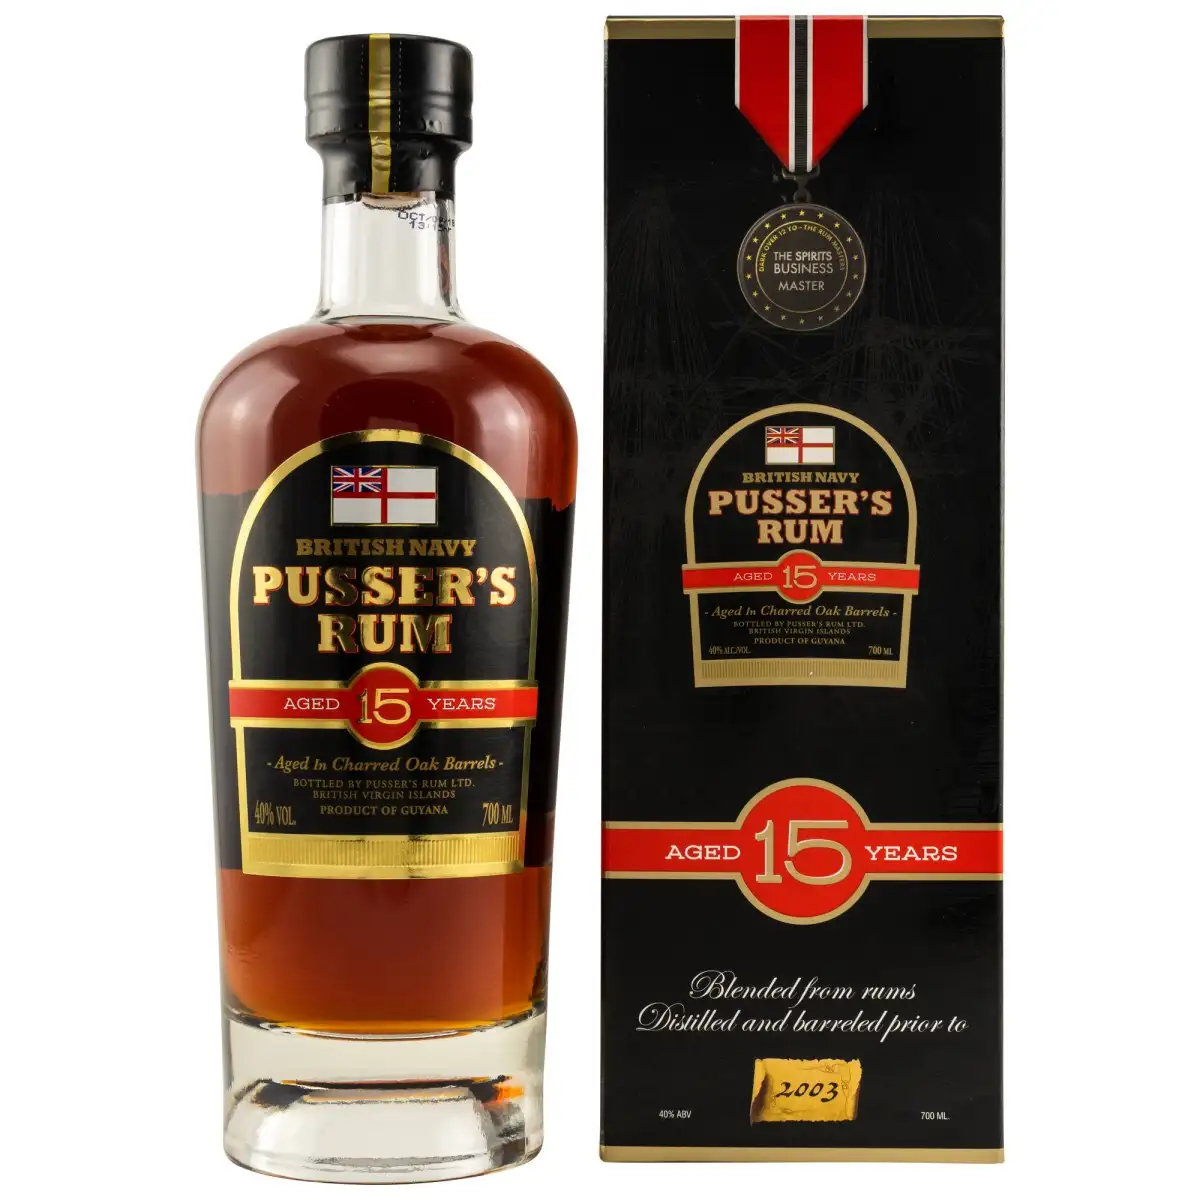 Image of the front of the bottle of the rum Aged 15 Years